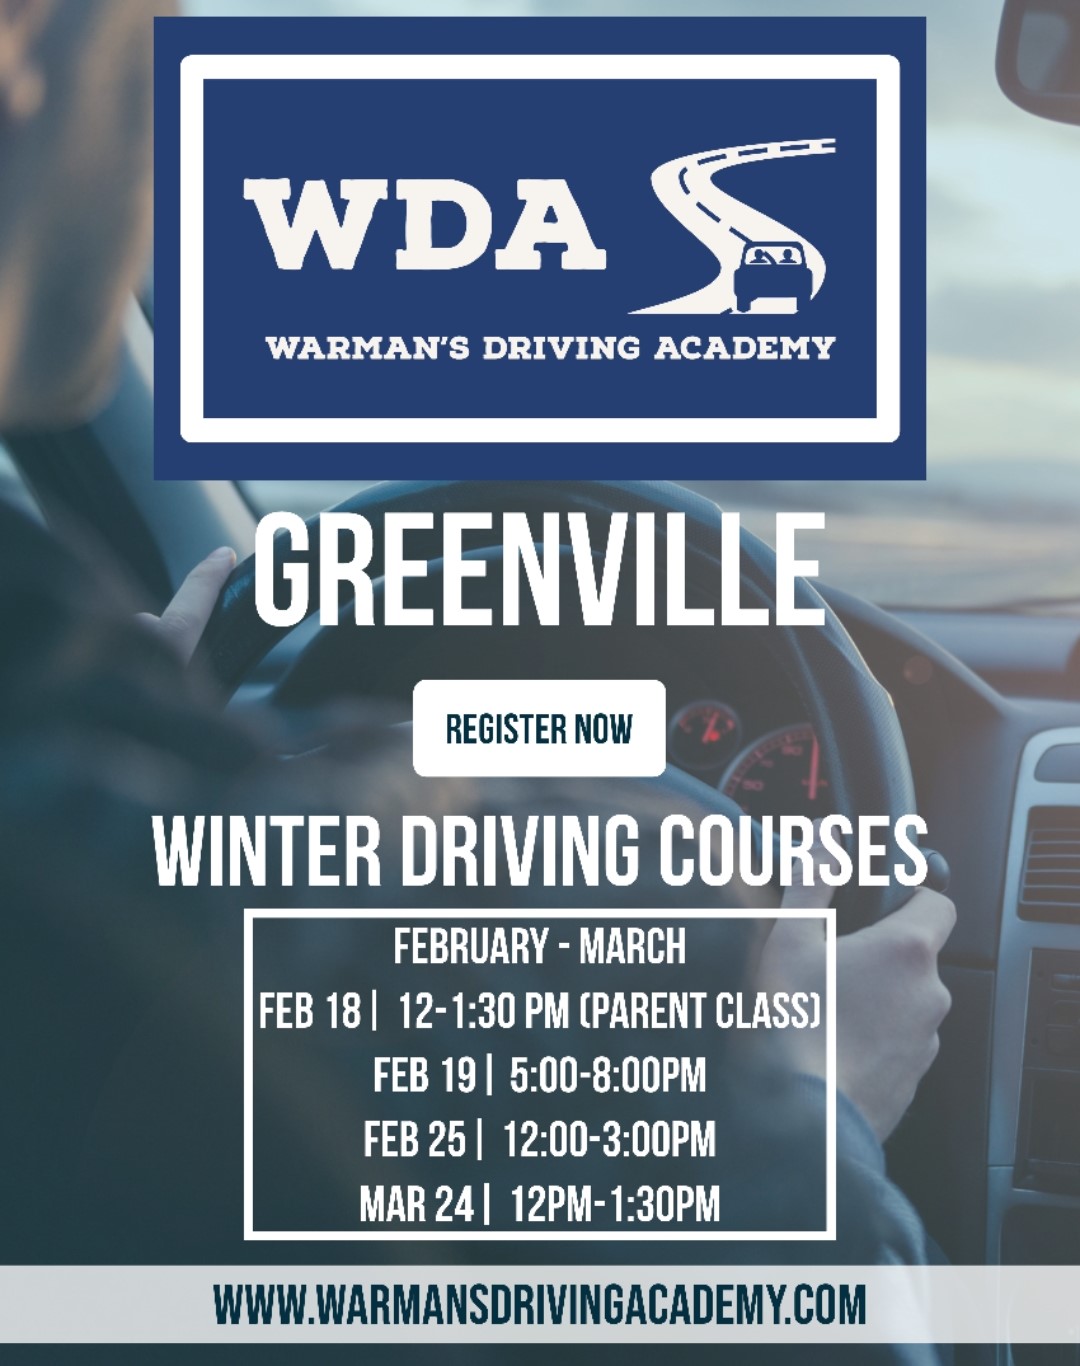 Warman's driving flyer with dates